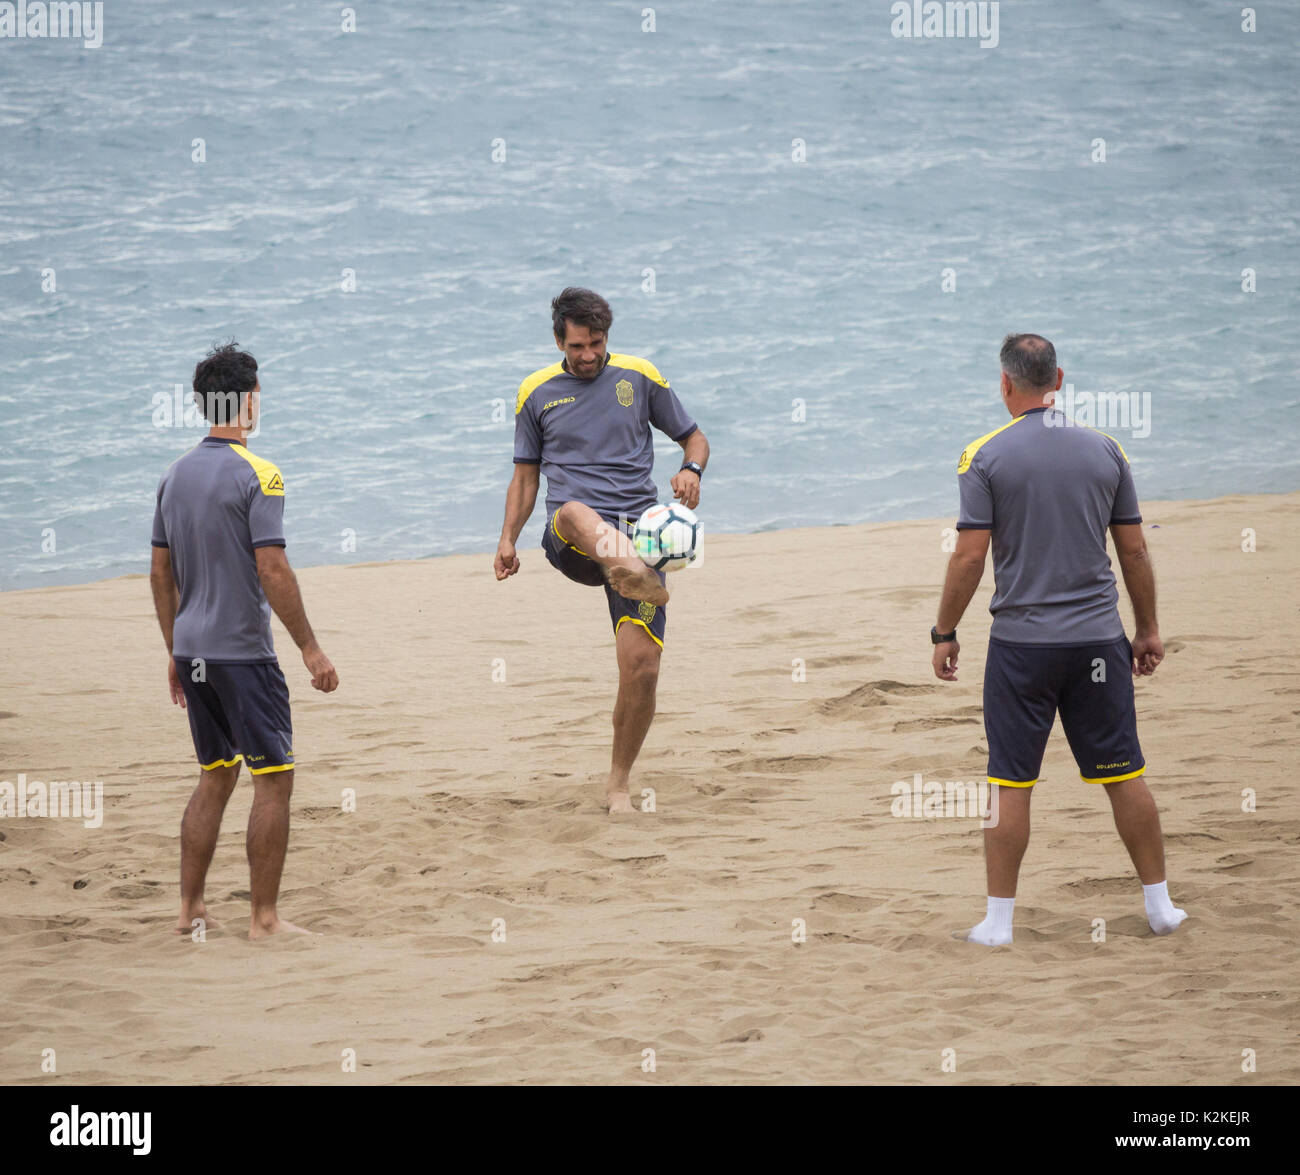 Las Palmas, Gran Canaria, Canary Islands, Spain. 31st August, 2017. With Chelsea striker Loic Remy rumoured to be close to signing for Spanish La Liga team, Las Palmas, the Las Palmas players have a morning training session on one of the city beaches in Las Palmas, the capital of Gran Canaria. UK press reporting that Diego Costa could also be heading to Las Palmas on a four month loan while he waits to re-join Atletico Madrid permanently when their transfer ban gets lifted in January. Credit: ALAN DAWSON/Alamy Live News Stock Photo